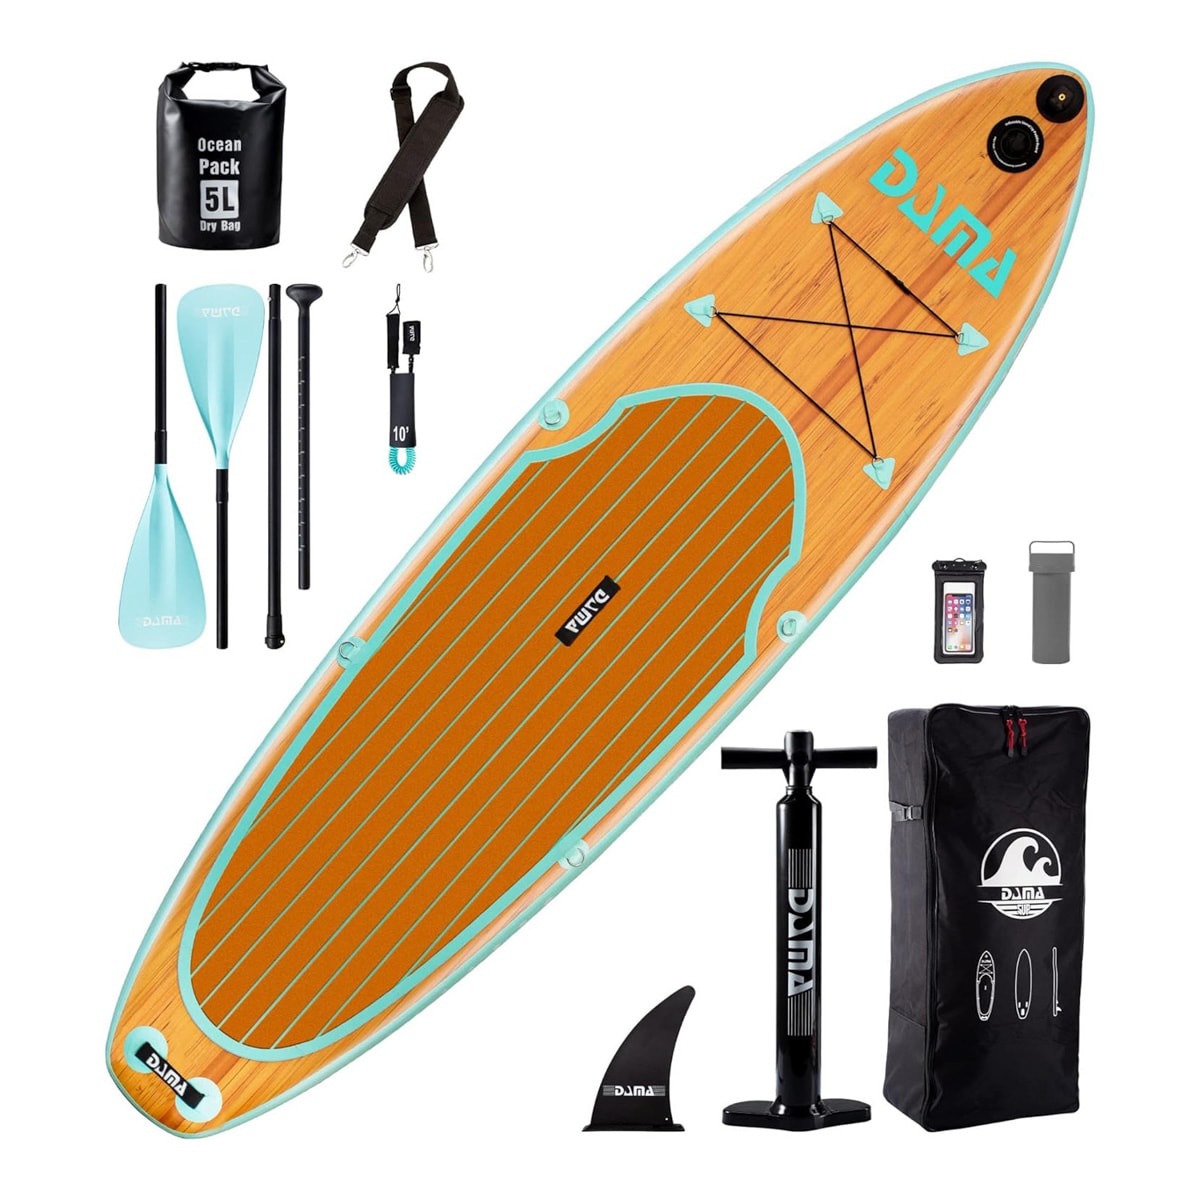 Inflatable paddle board with all of the accessories.